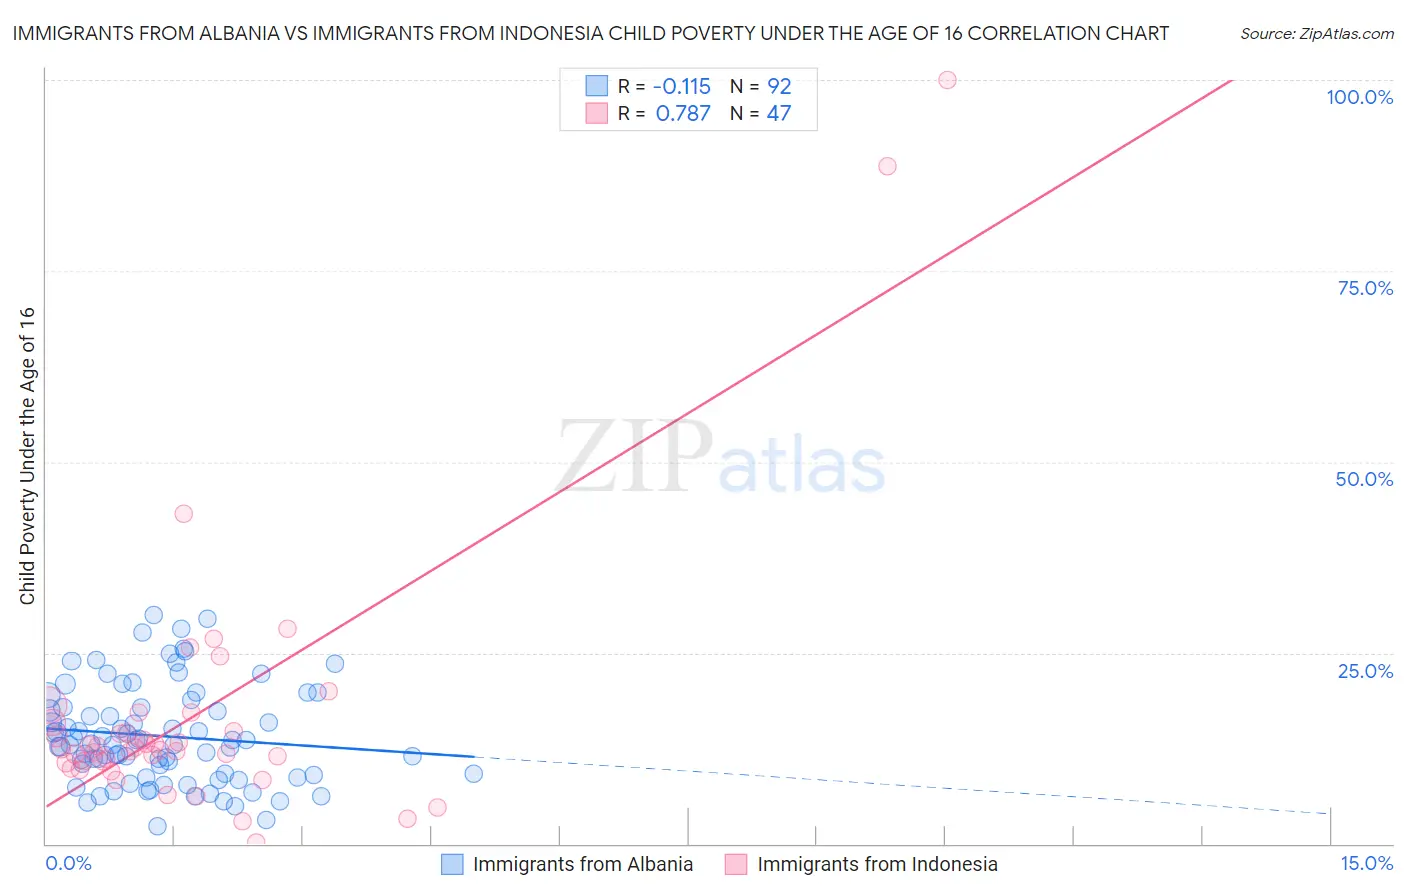 Immigrants from Albania vs Immigrants from Indonesia Child Poverty Under the Age of 16